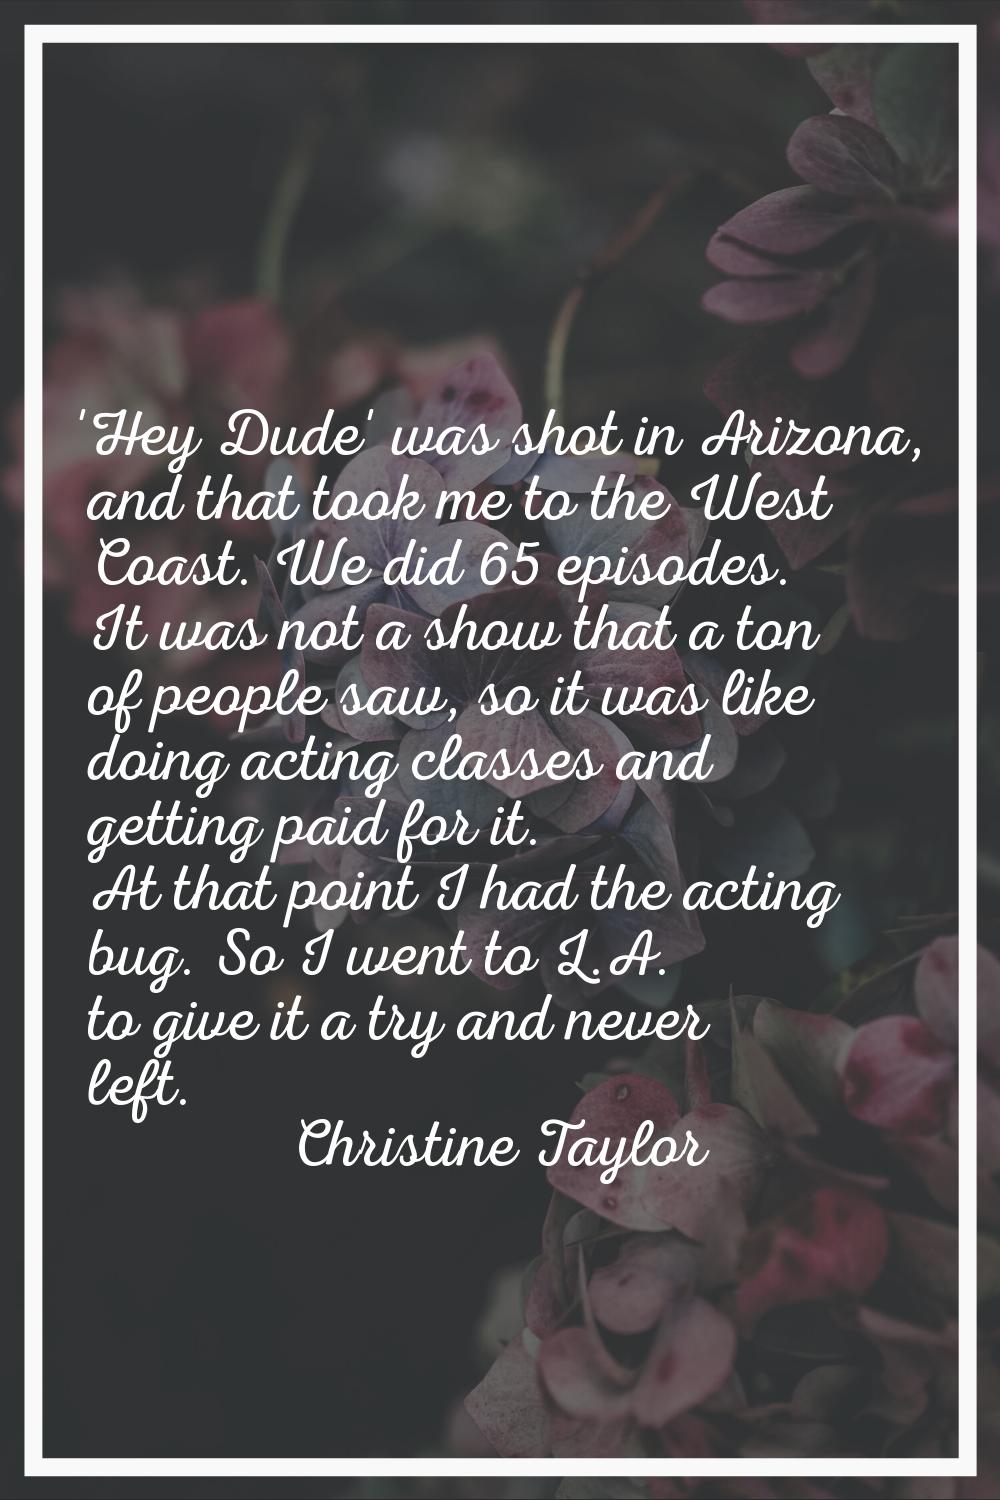 'Hey Dude' was shot in Arizona, and that took me to the West Coast. We did 65 episodes. It was not 